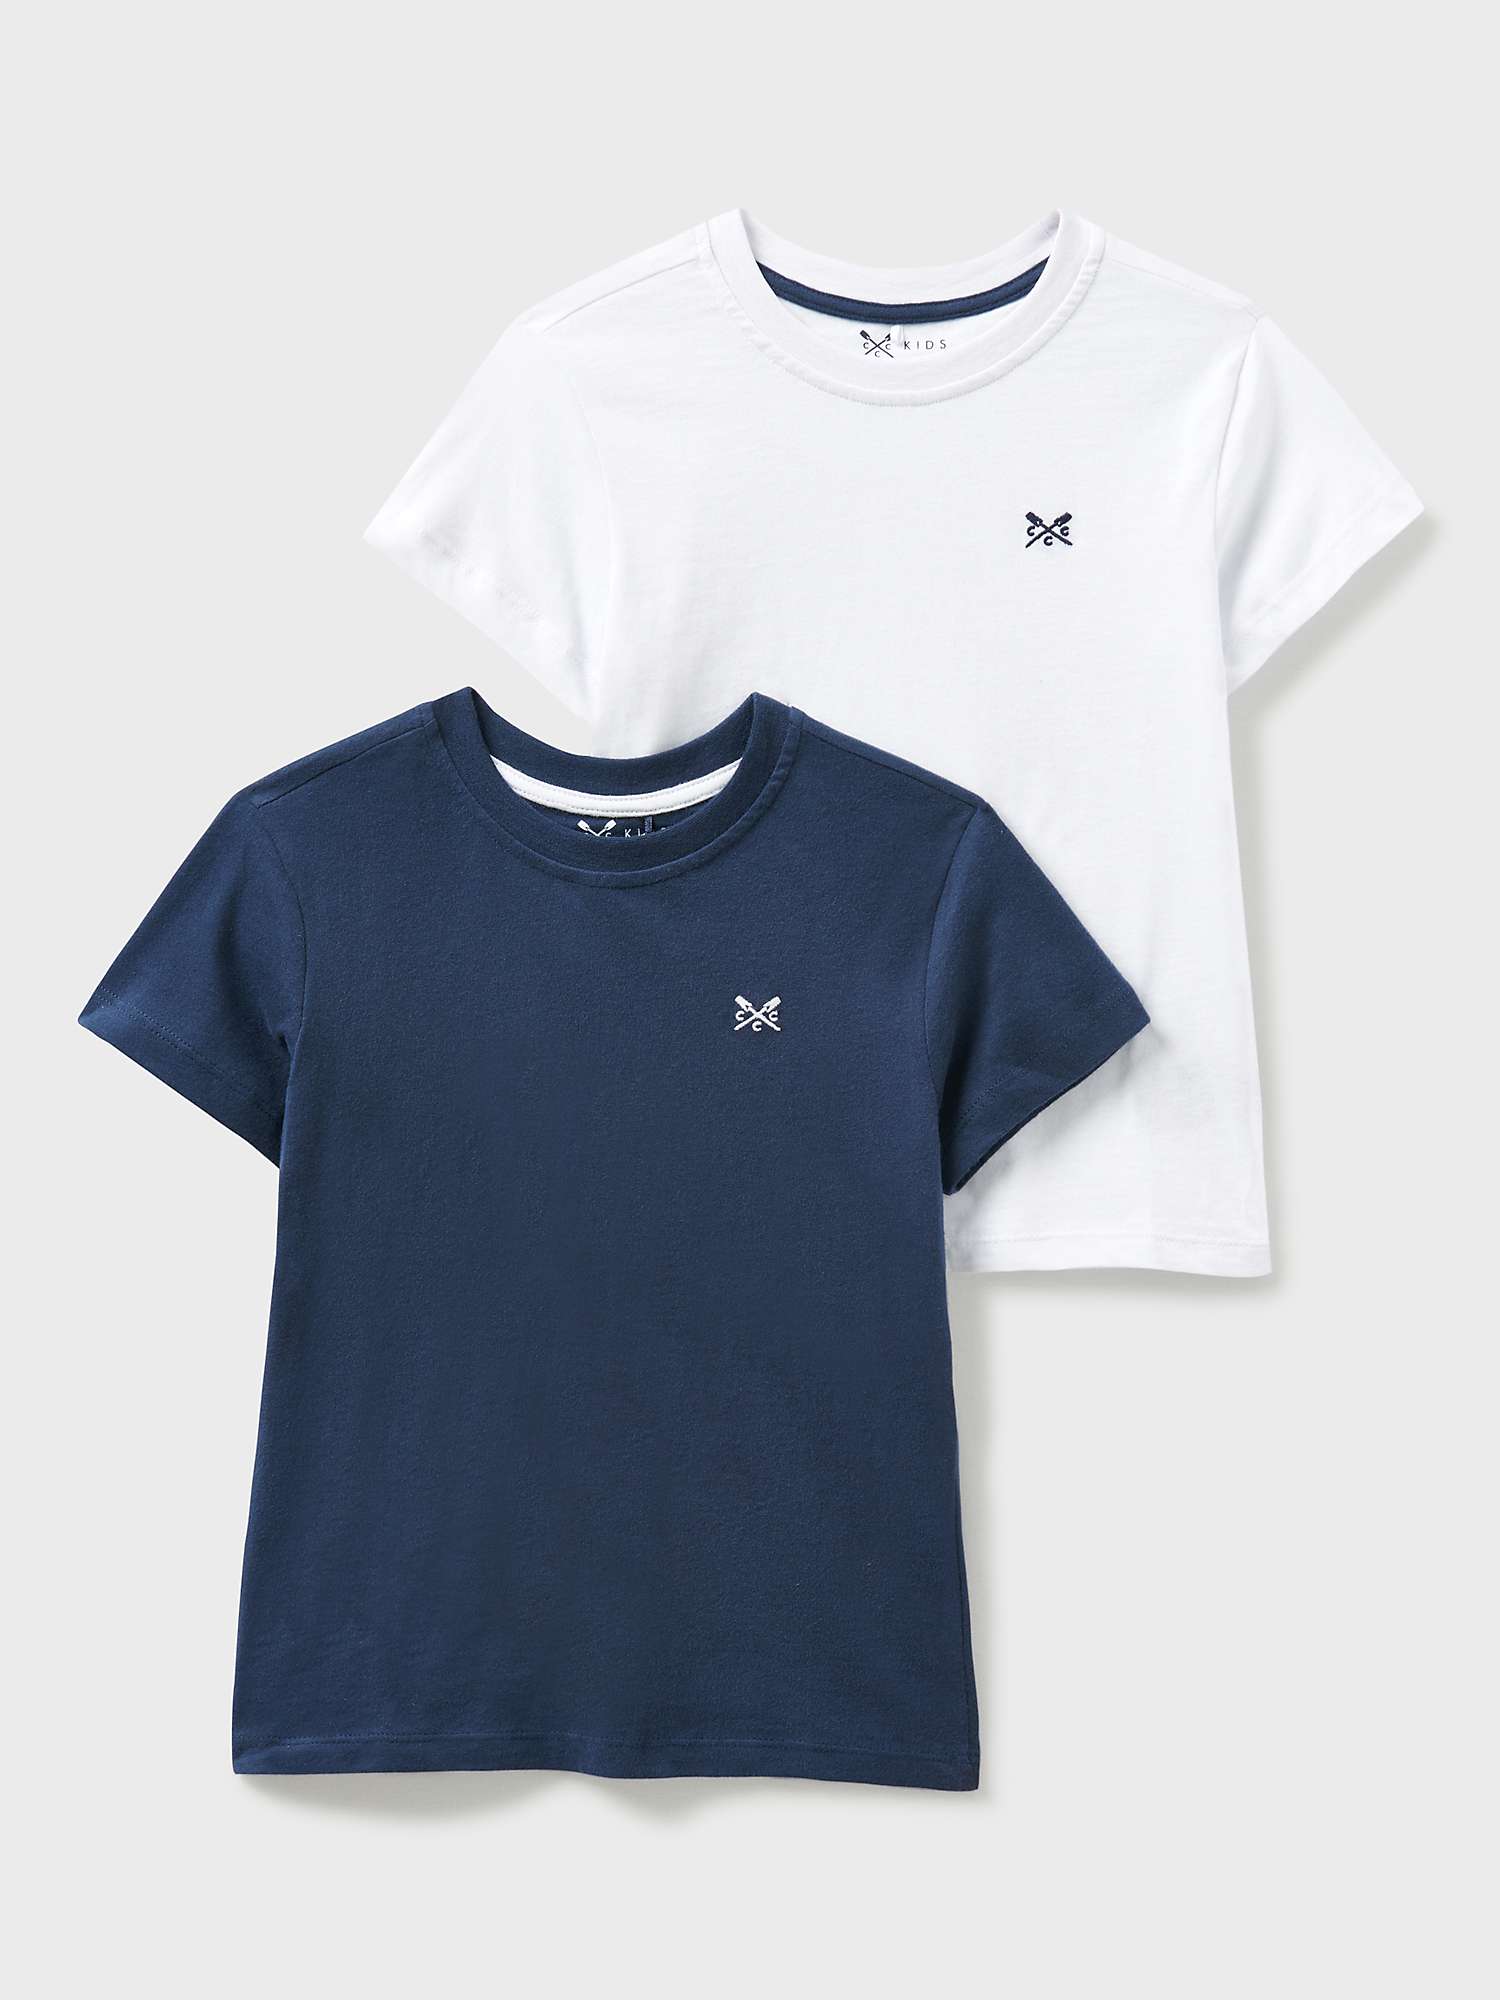 Buy Crew Clothing Kids' Classic Unisex T-Shirt, Pack of 2, Navy/White Online at johnlewis.com